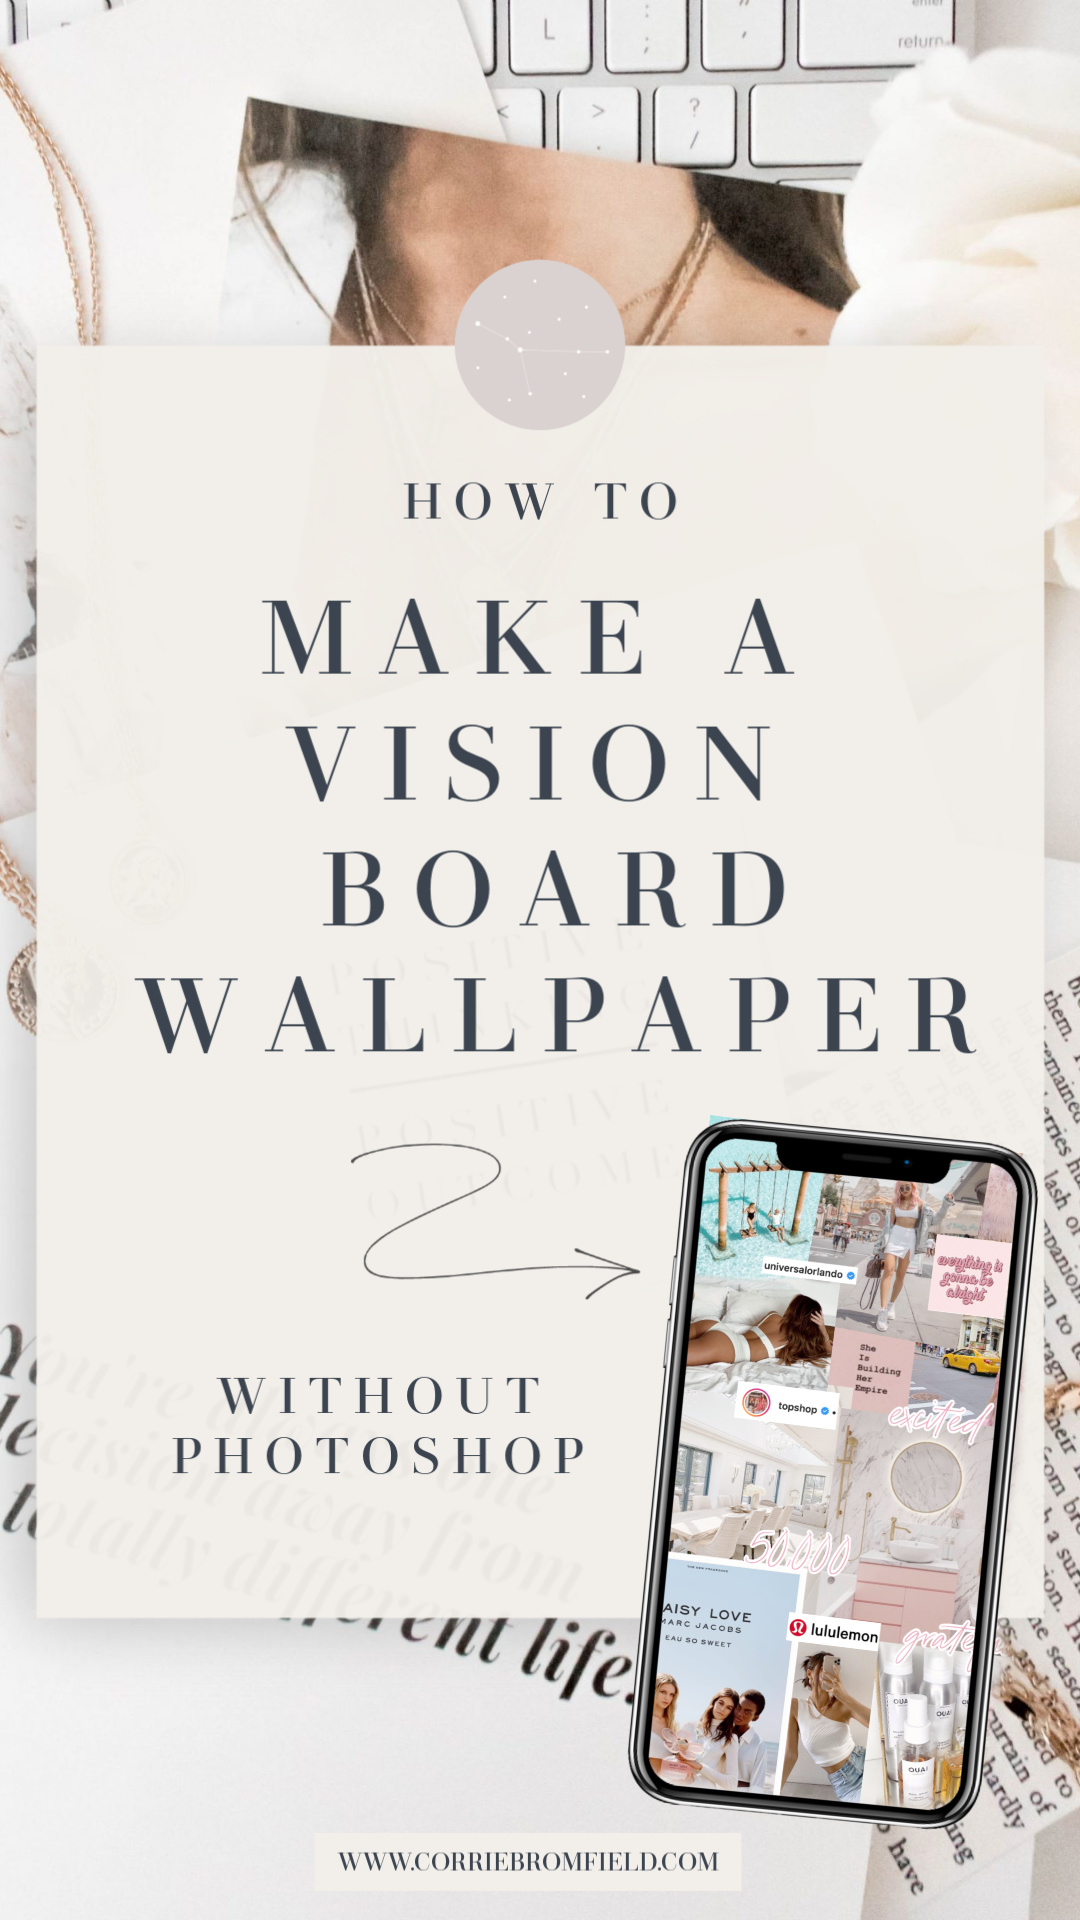 How To Make A Vision Board Wallpaper - Corrie Bromfield